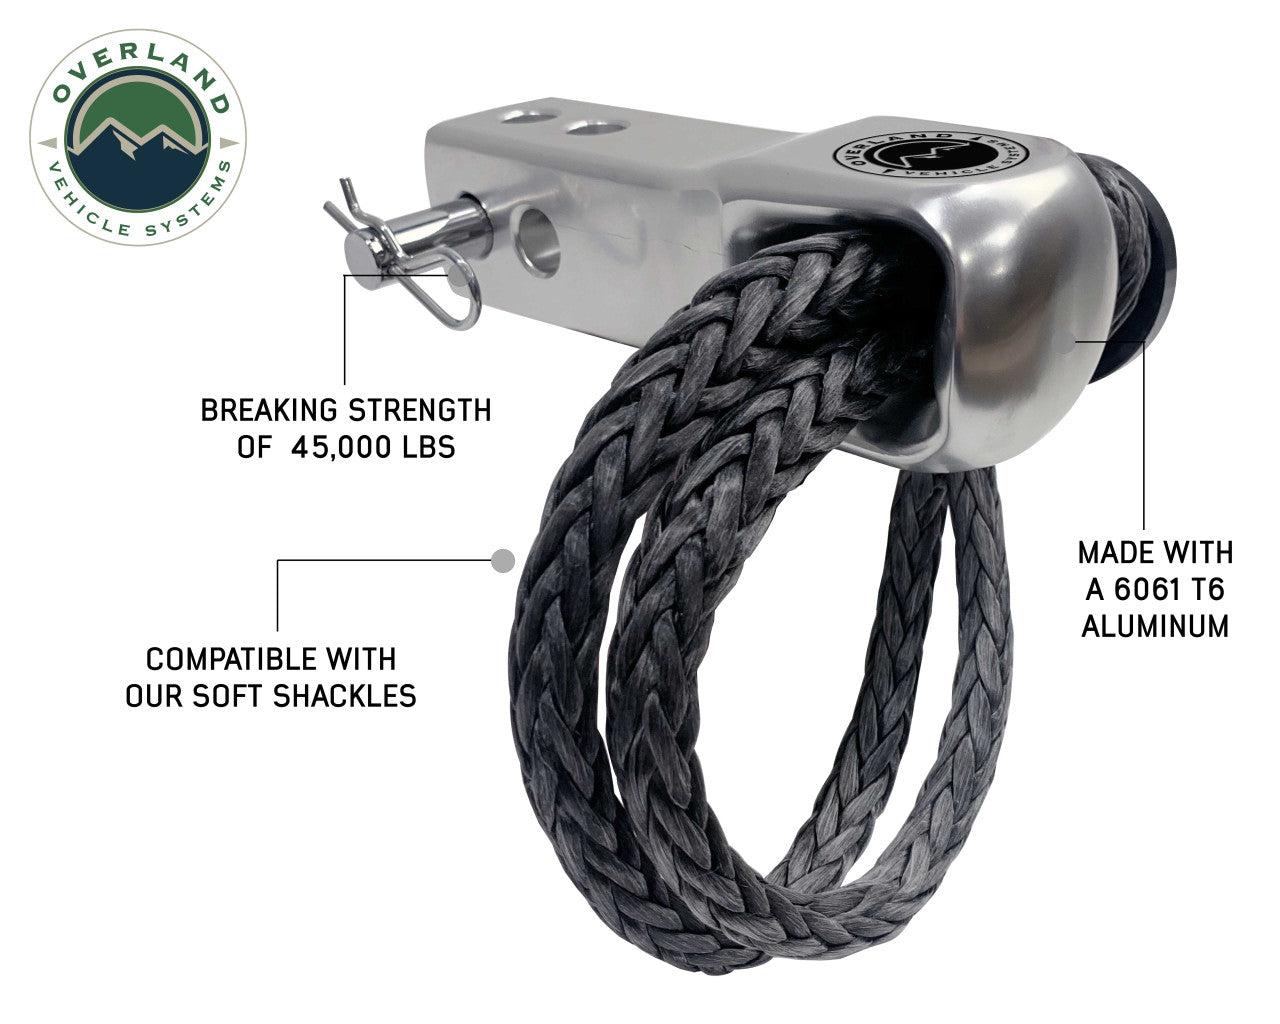 OVS Soft Shackle 5/8" With Collar 44,500 Lb. And Aluminum Receiver Mount Combo Kit